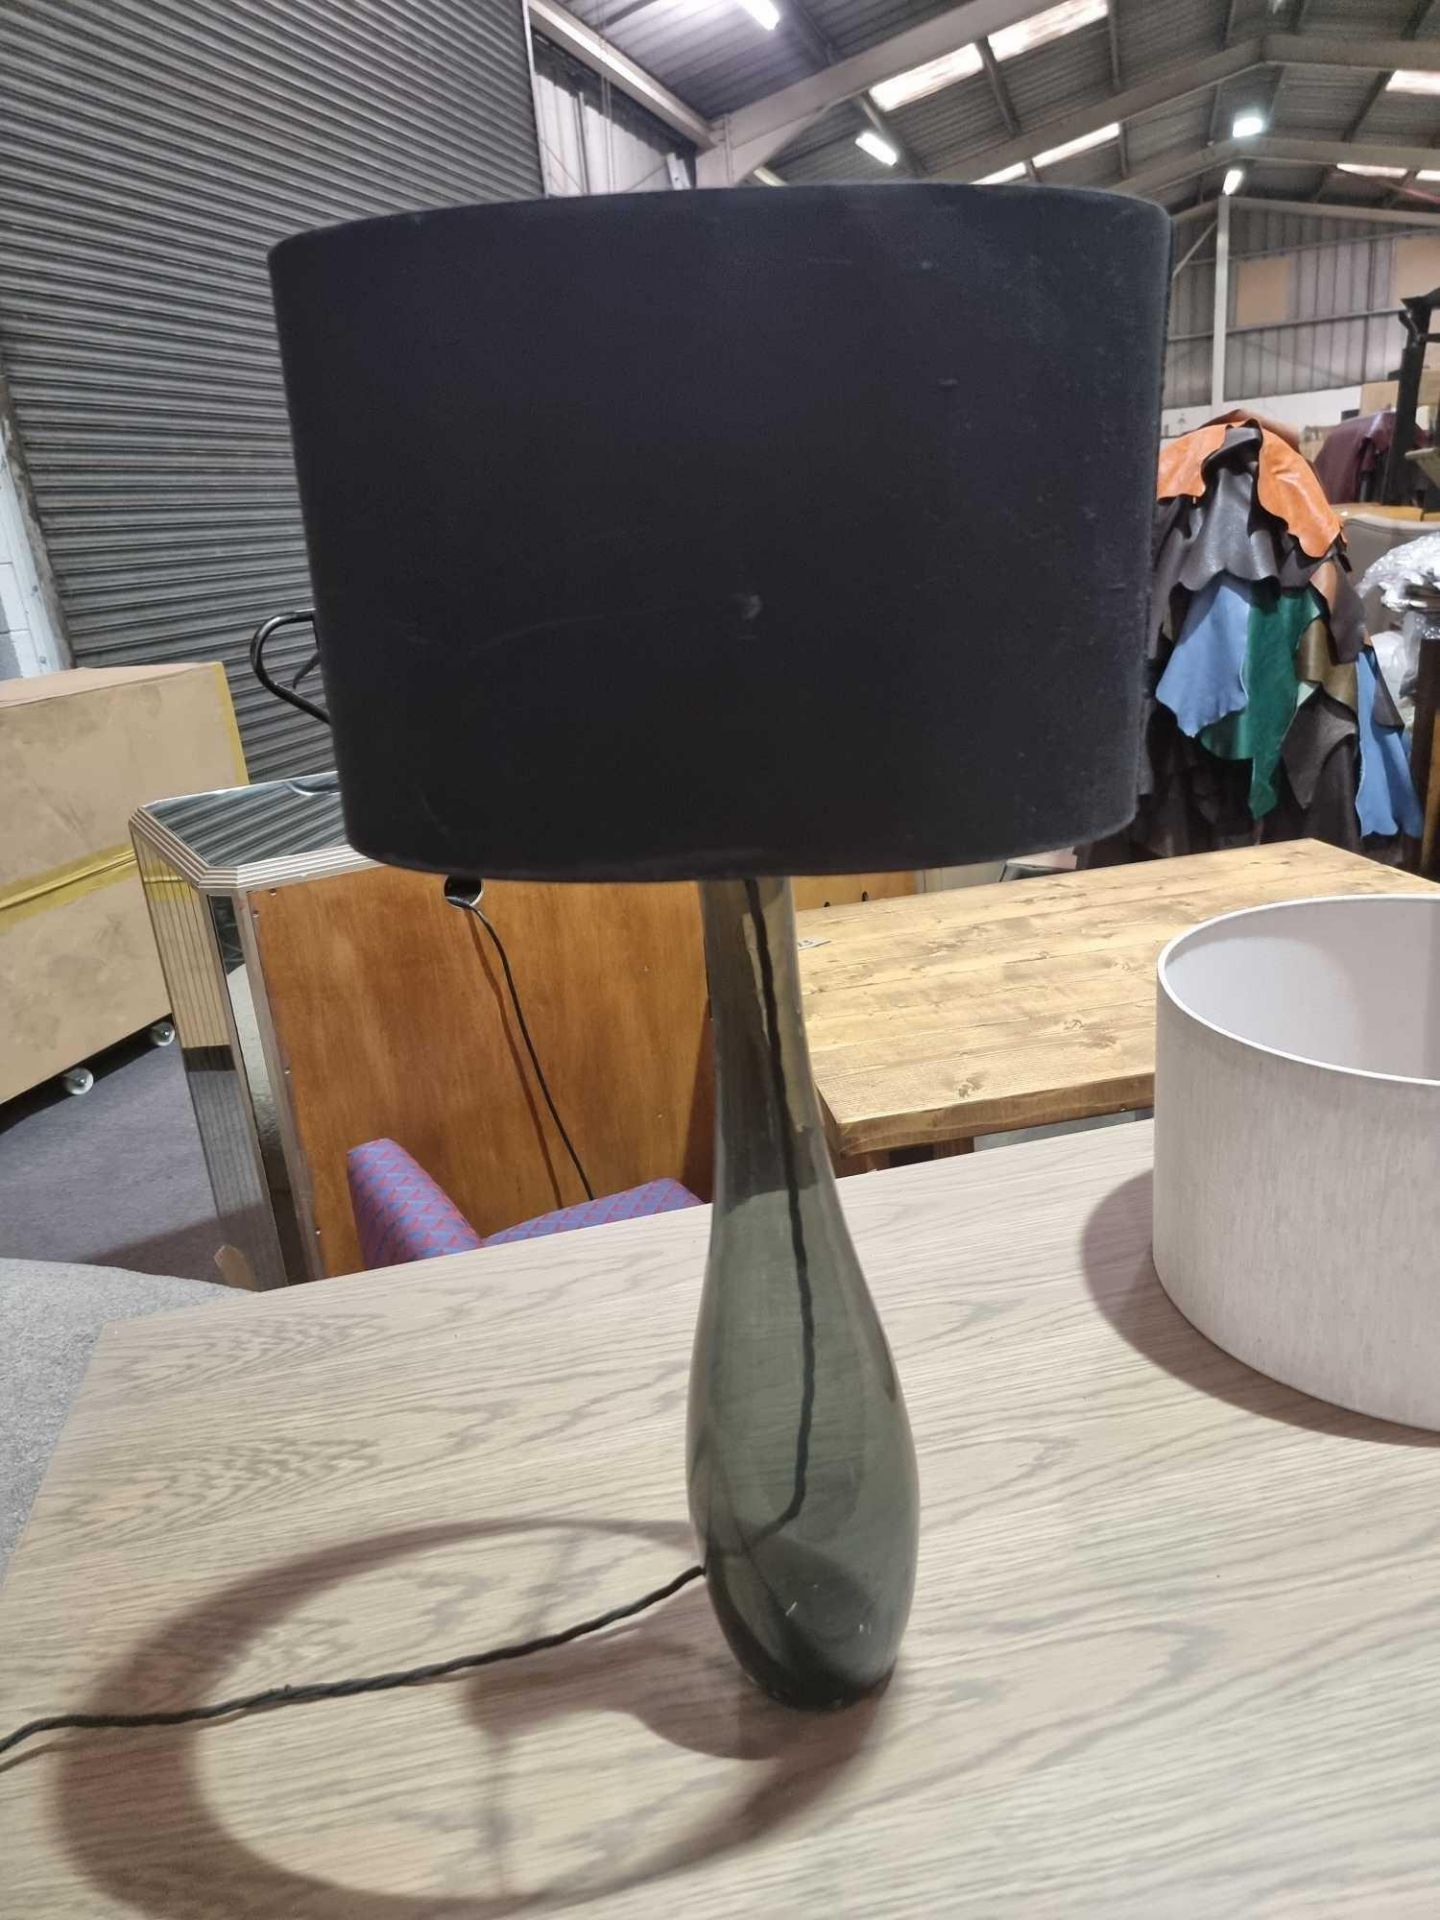 Heathfield And Co Bliss Table Lamp The Table Lamp Perfectly Demonstrates Understated Elegance. The